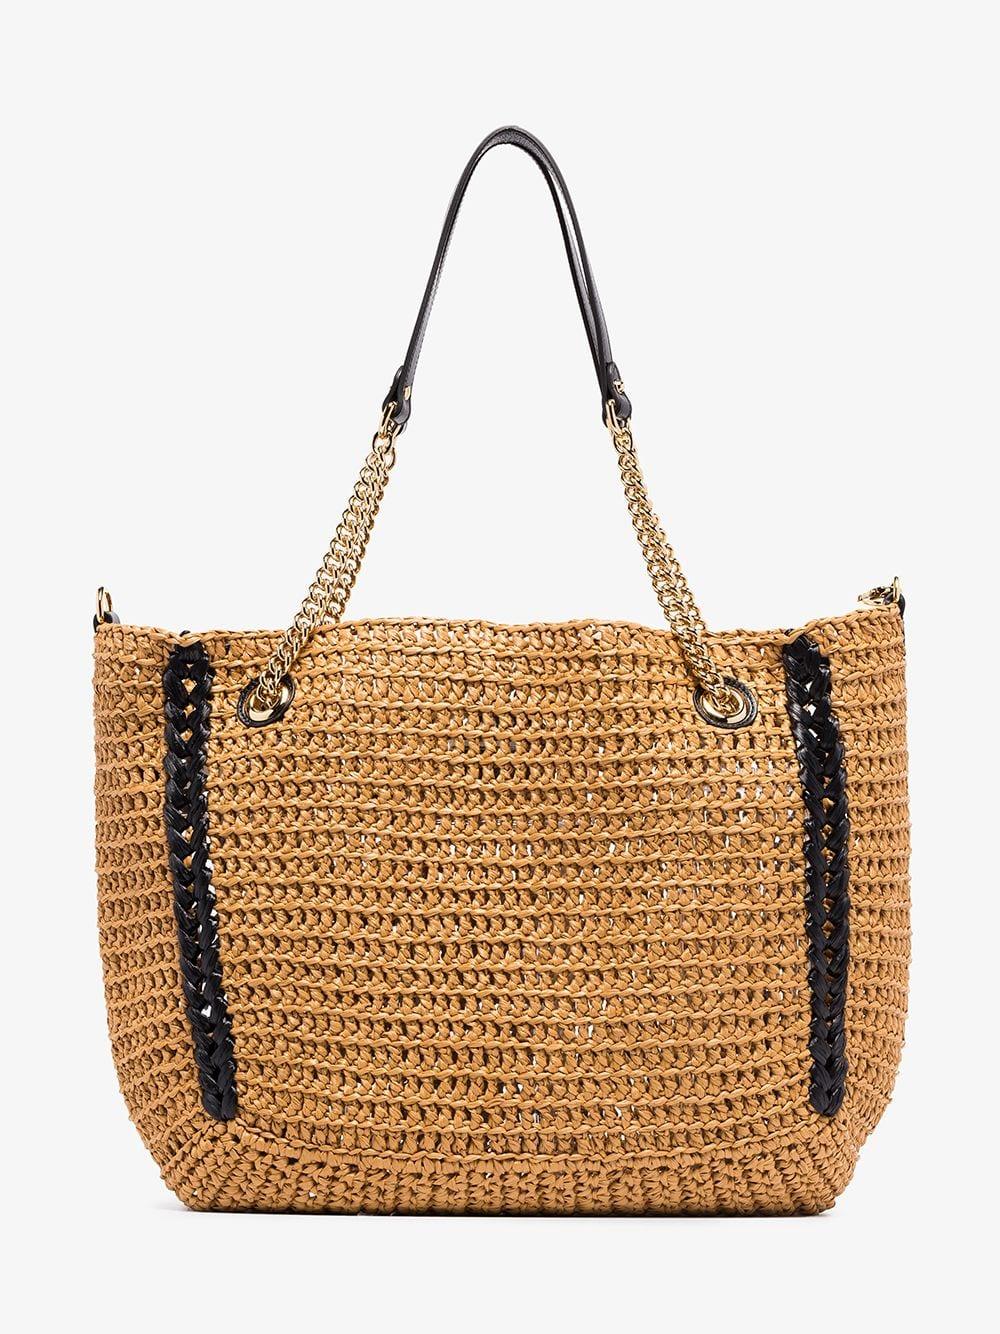 Gucci Large Gg Marmont Crochet Bag | Lyst